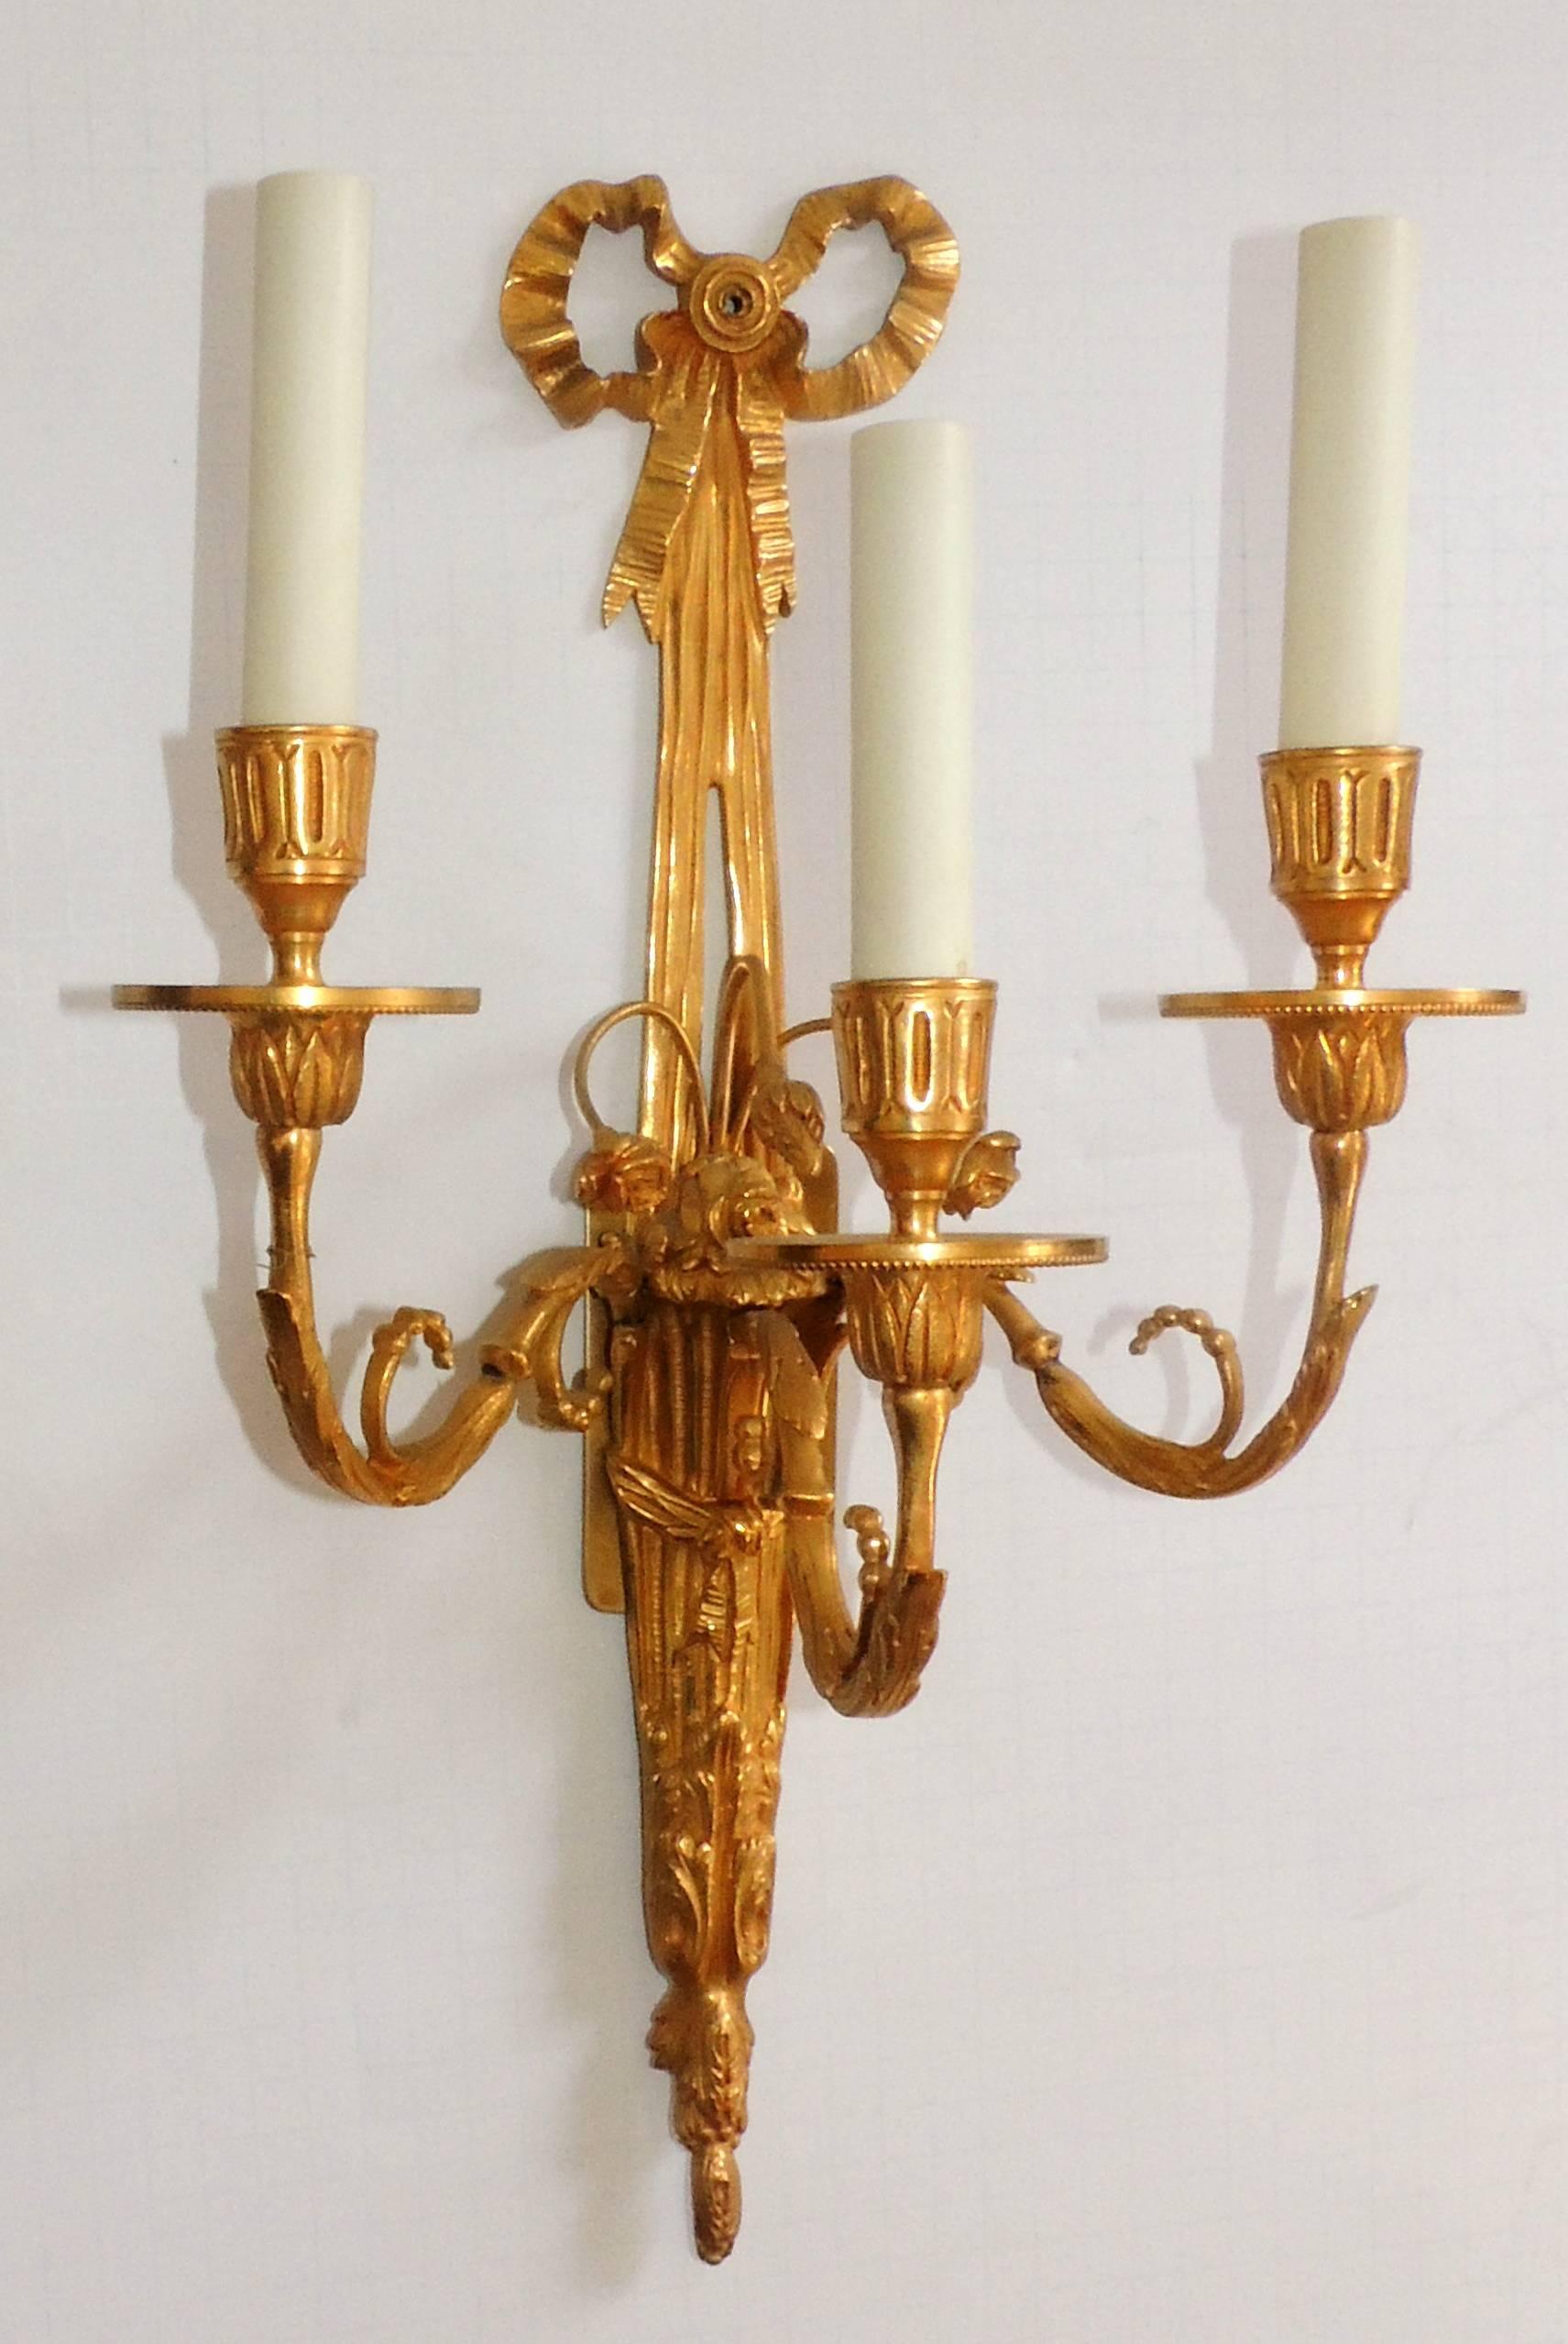 A wonderful regency style set of four French gilt doré bronze, bow top and flower spray three-light sconces wired and ready to enjoy.
Sold per pair.